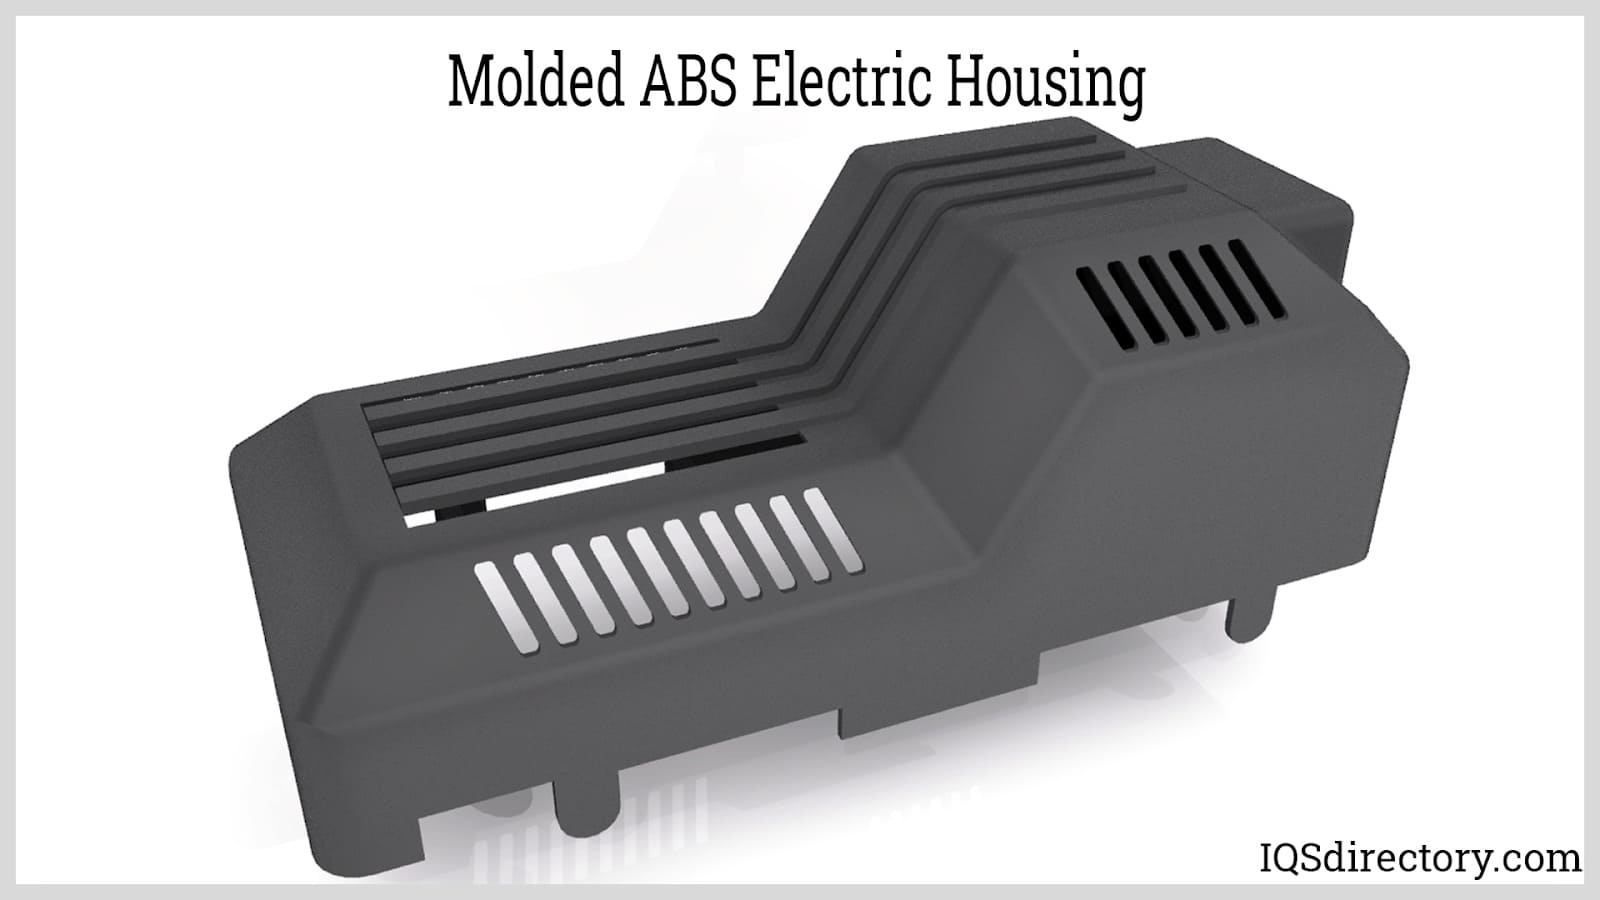 Molded ABS Electric Housing